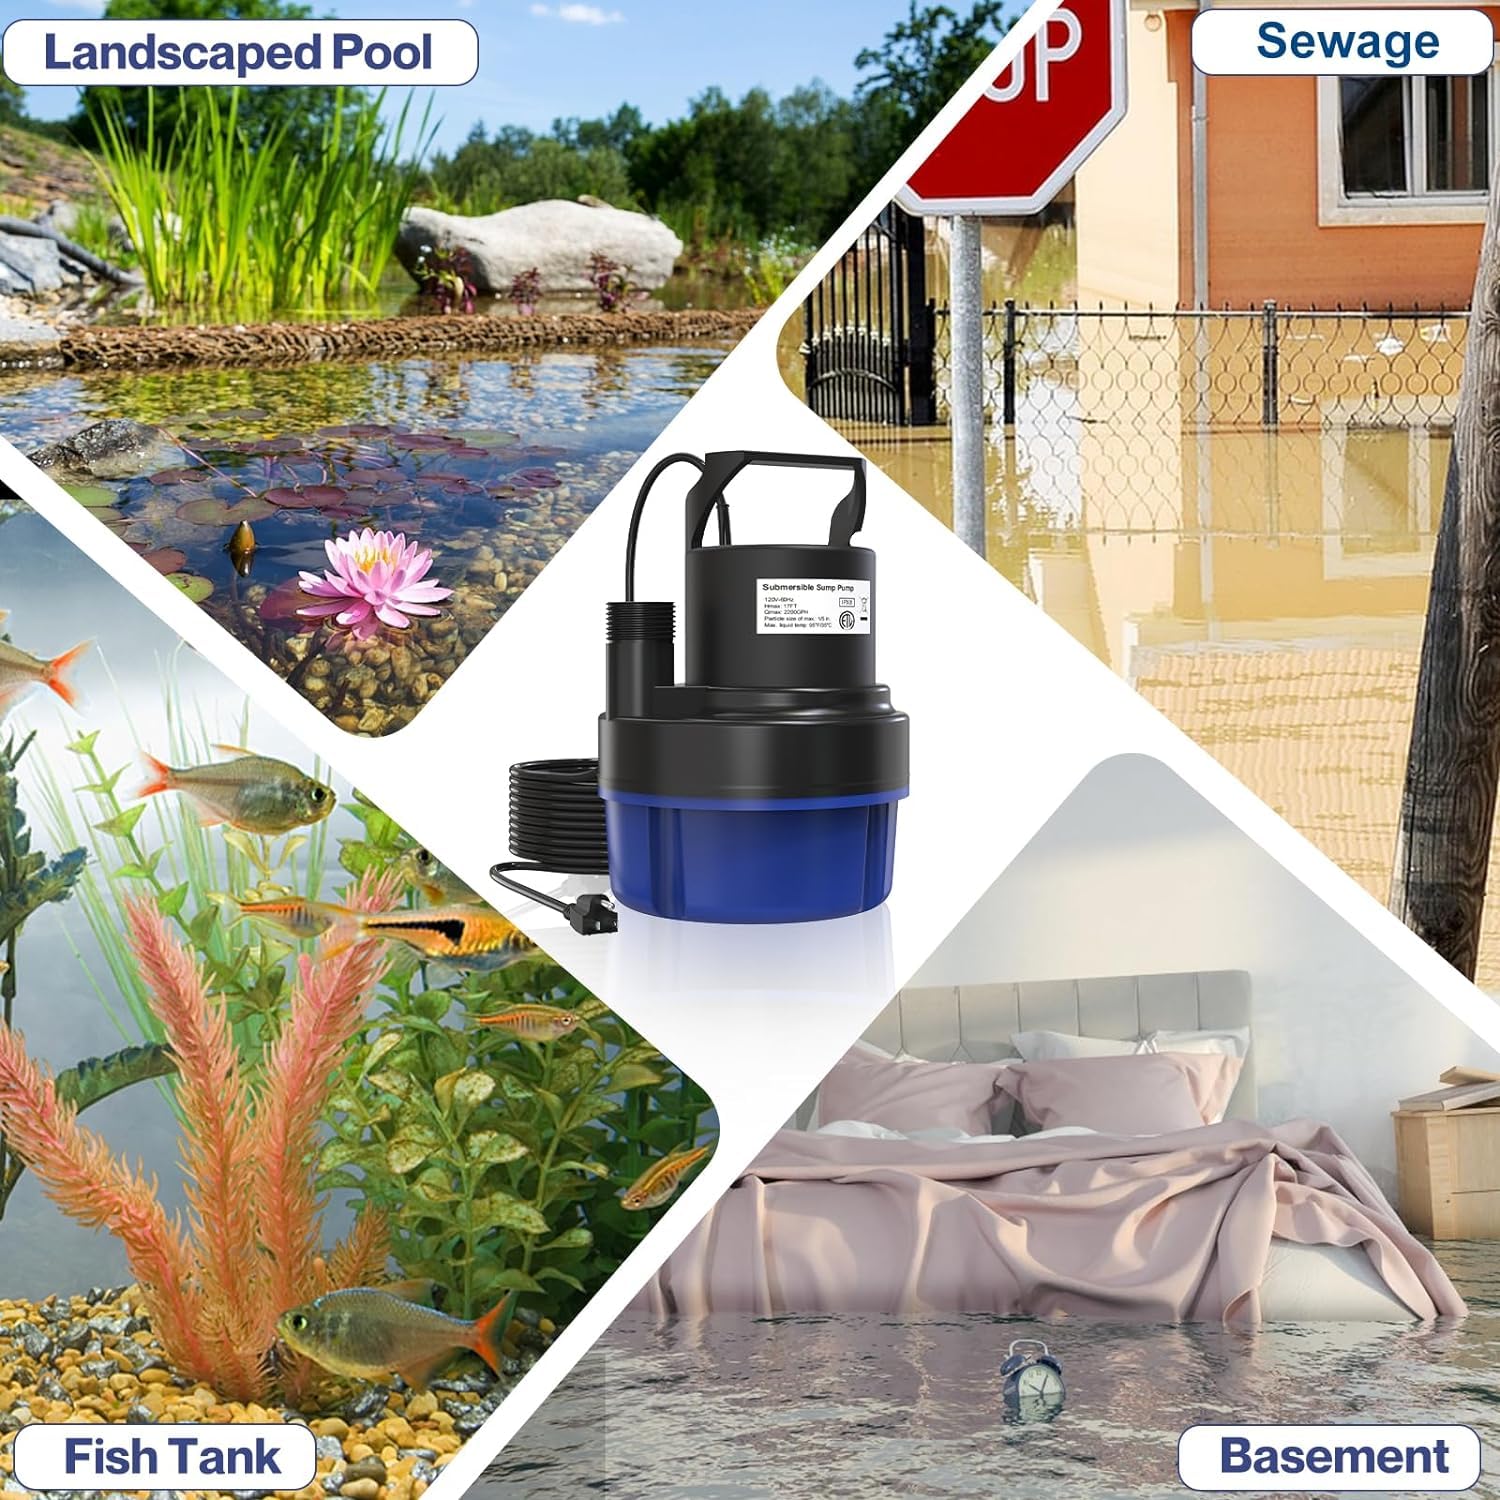 PoolHour 1/2 HP Submersible Sump Pump - 2200 GPH Portable Utility Water Pump for Pool Draining, Electric Pool Water Transfer Pump with 25 FT Power Cord for Basement, Garden Pond